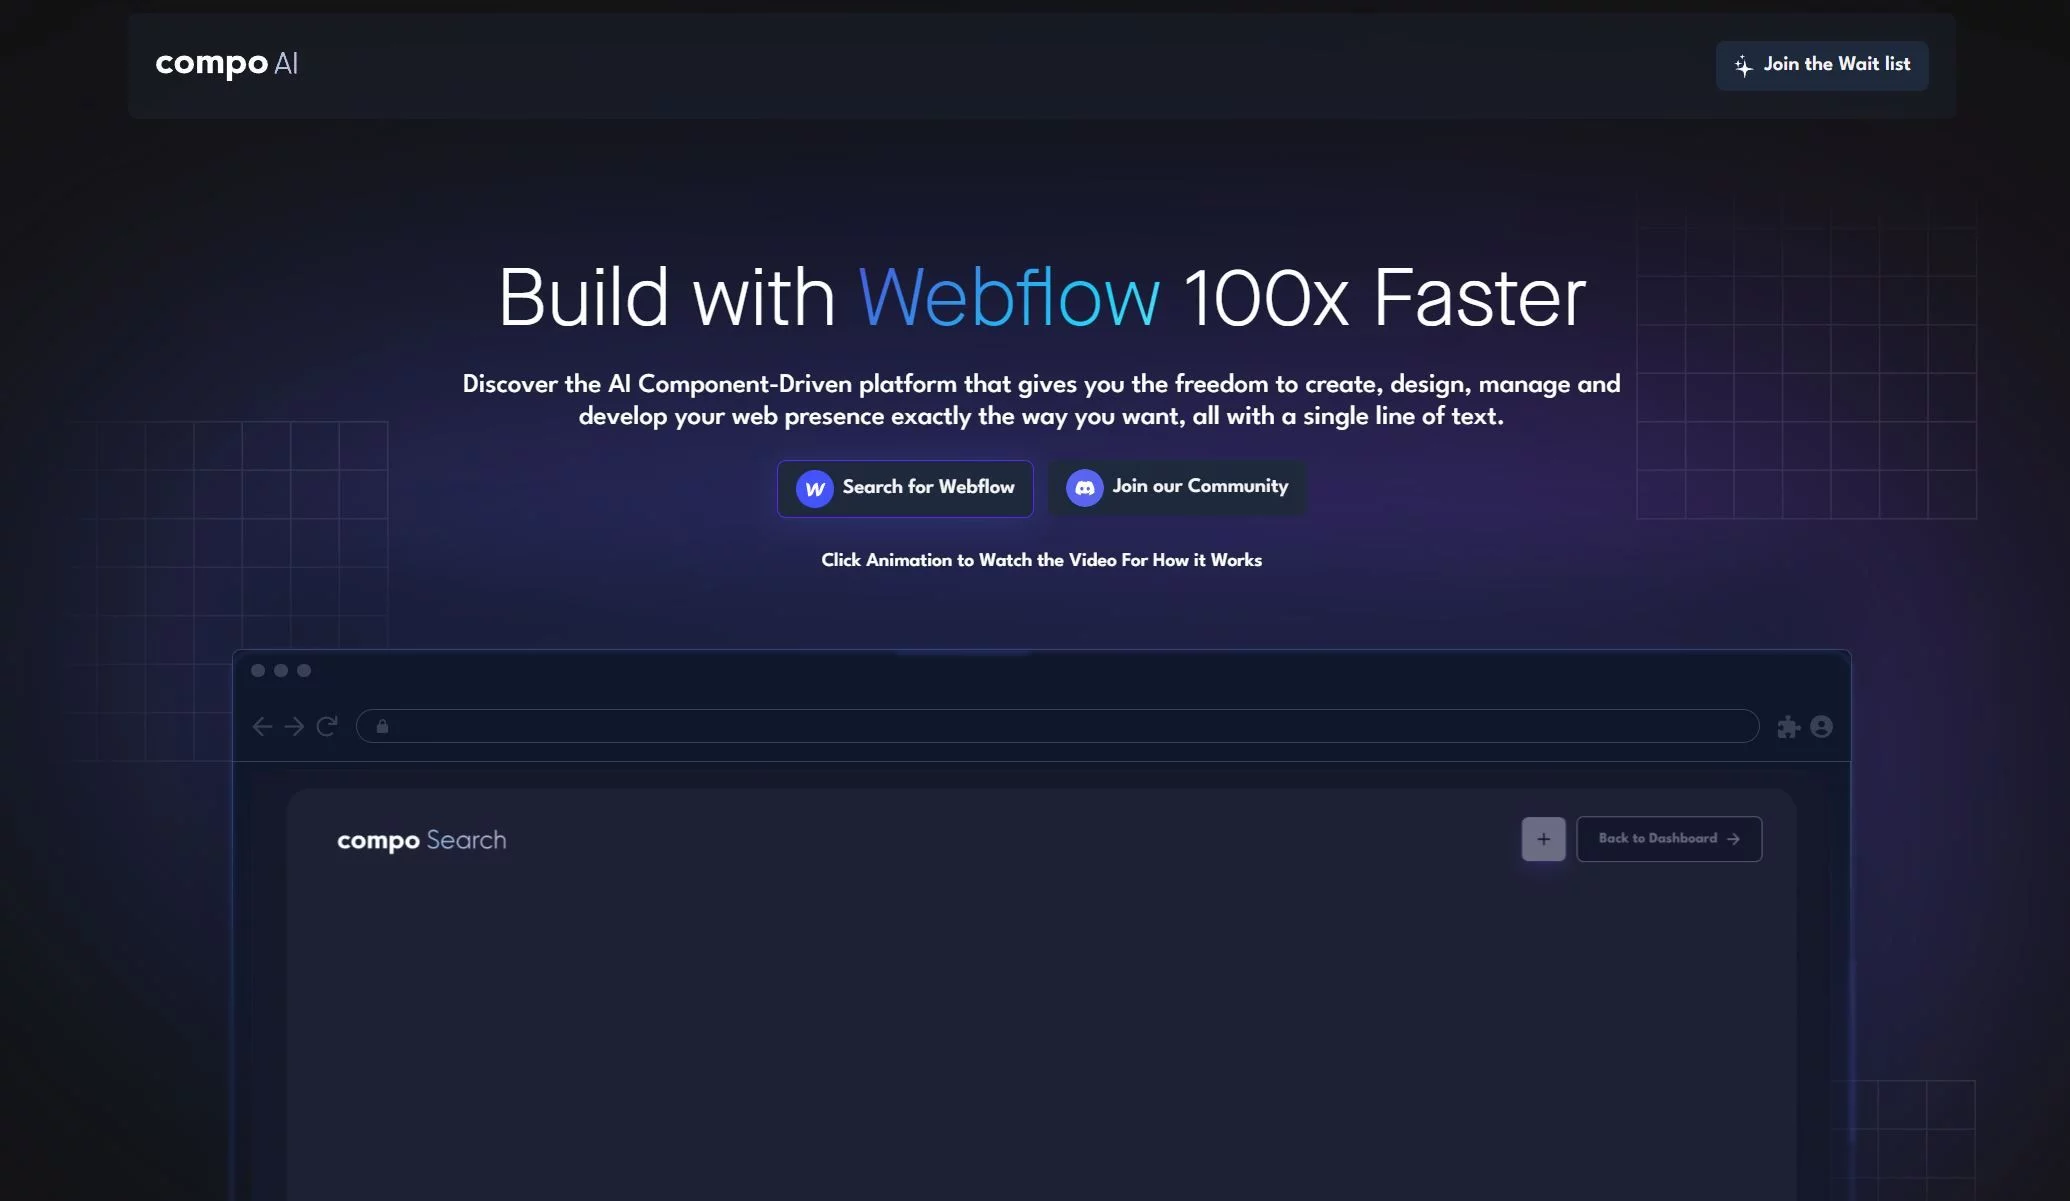  Build with Webflow 100x Faster